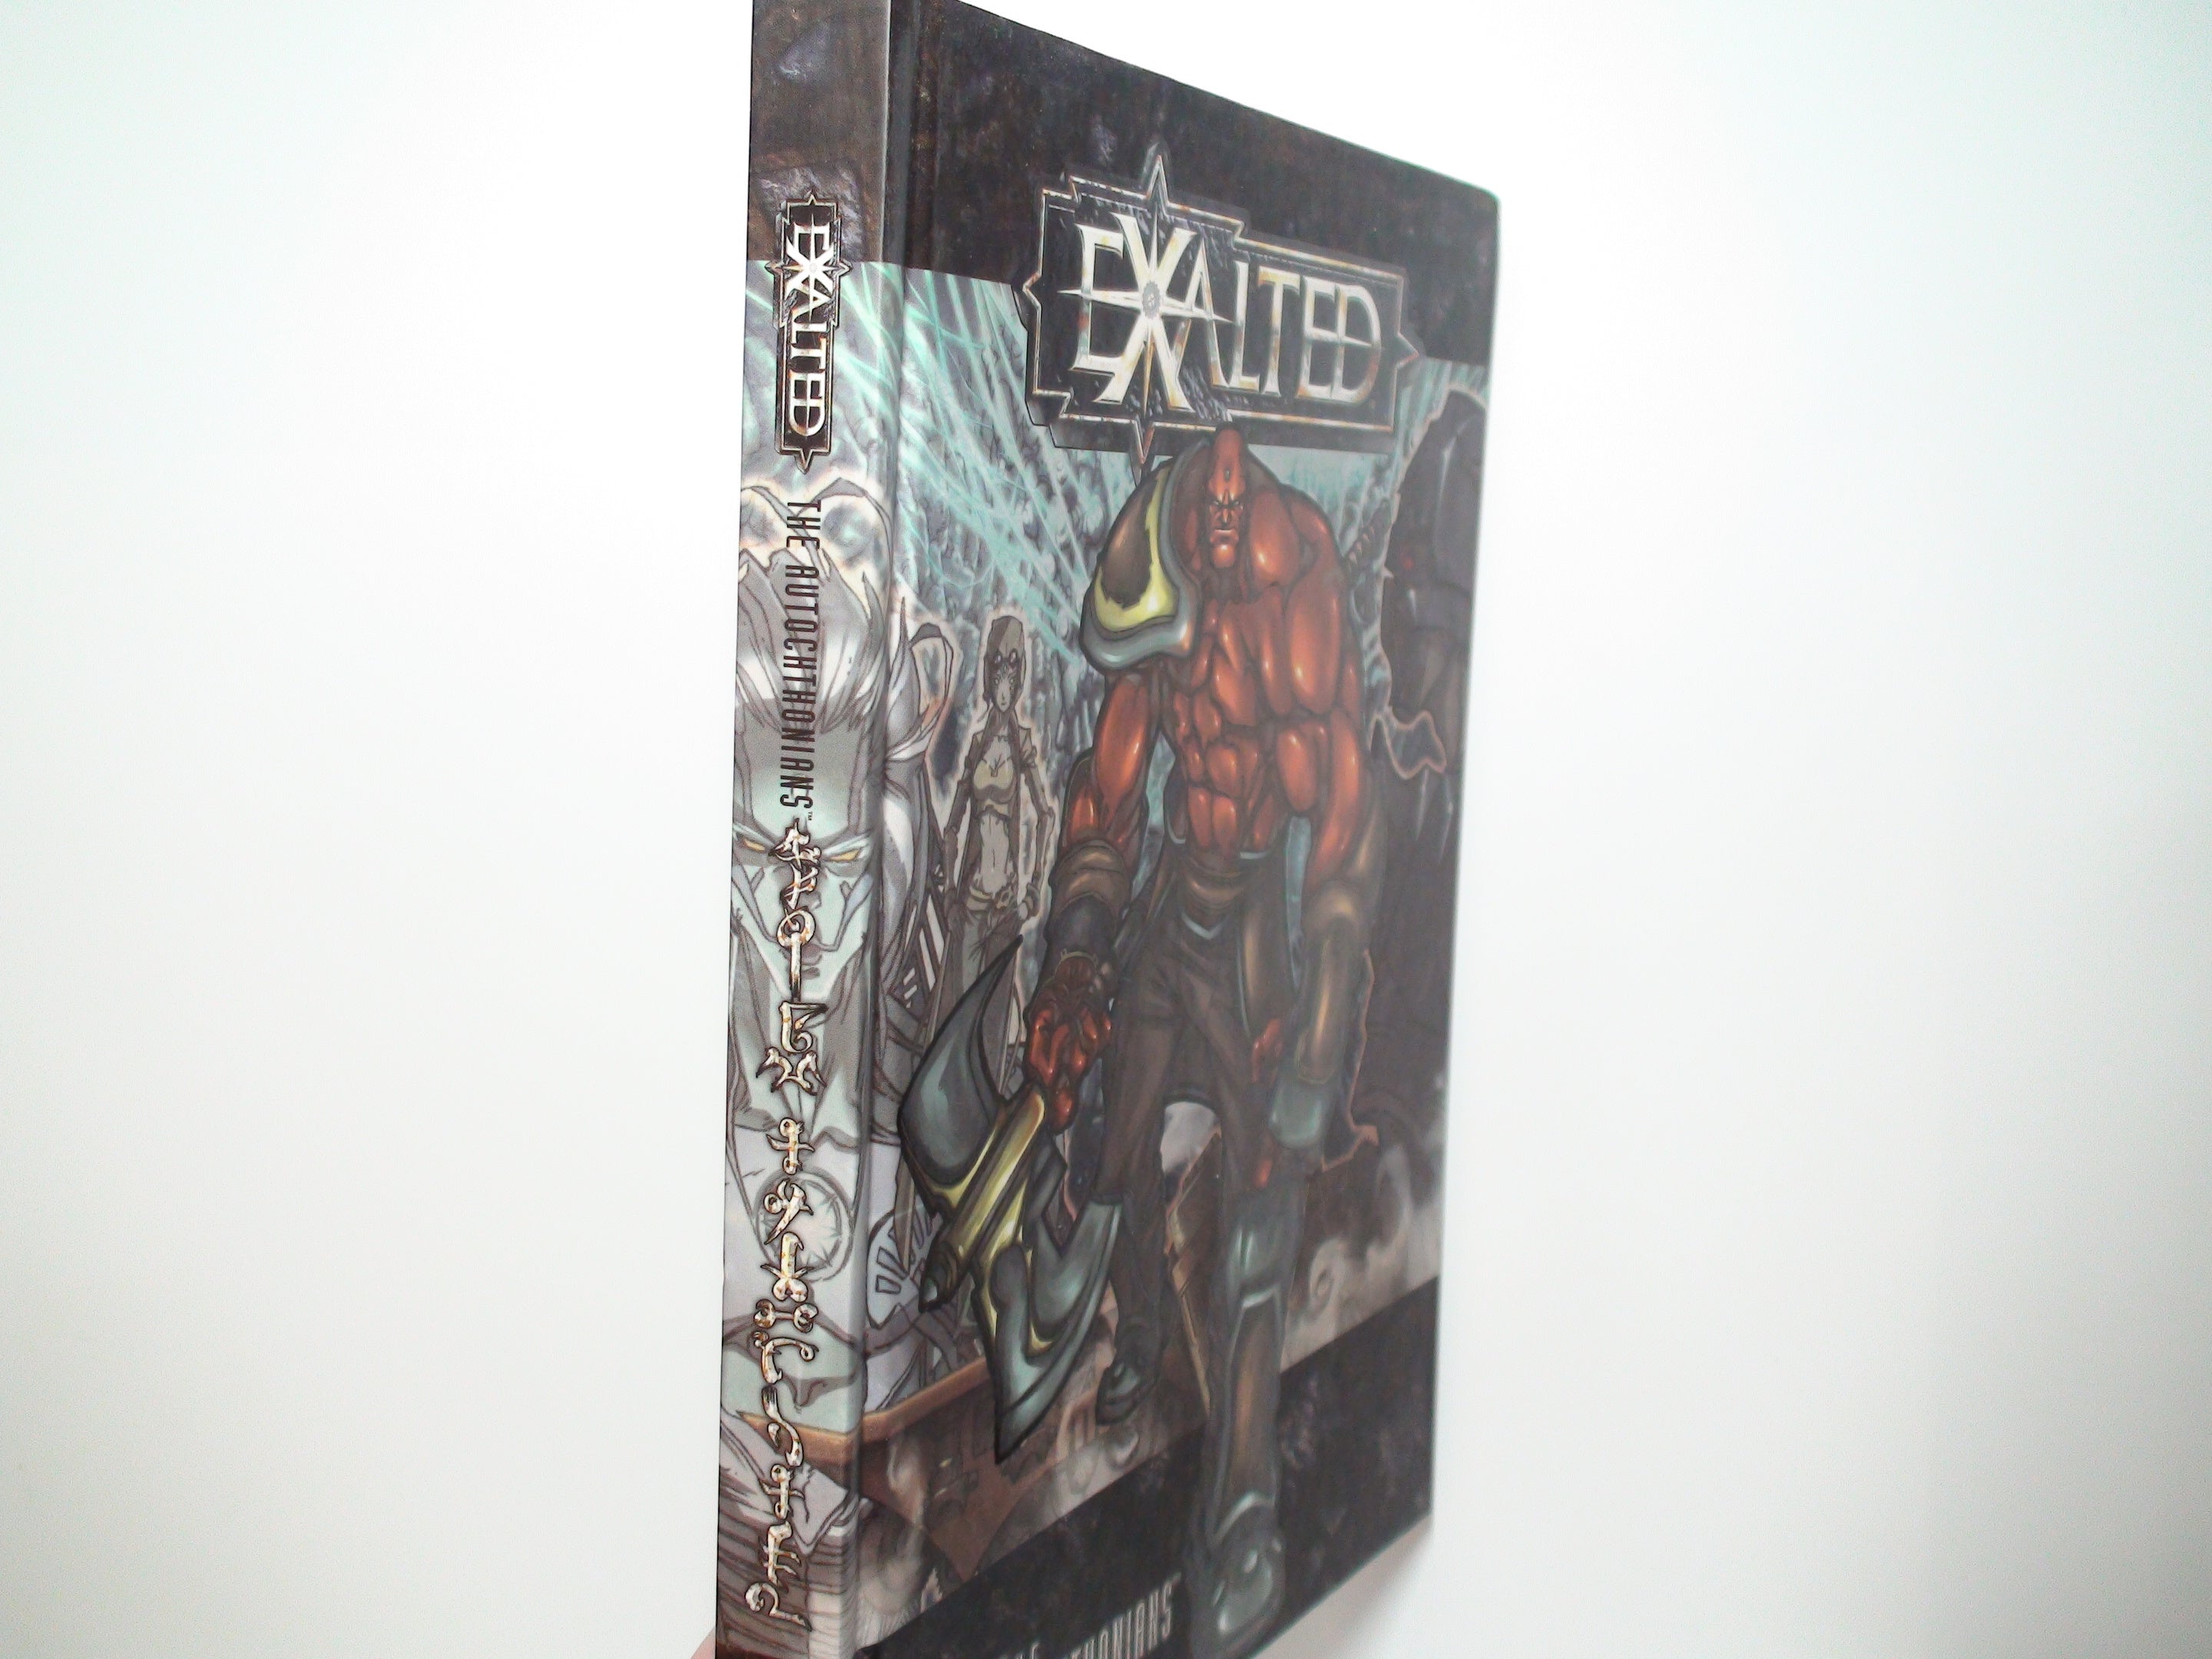 Exalted, The Autochthonians, White Wolf RPG, WW8816, 1st Ed, 2005